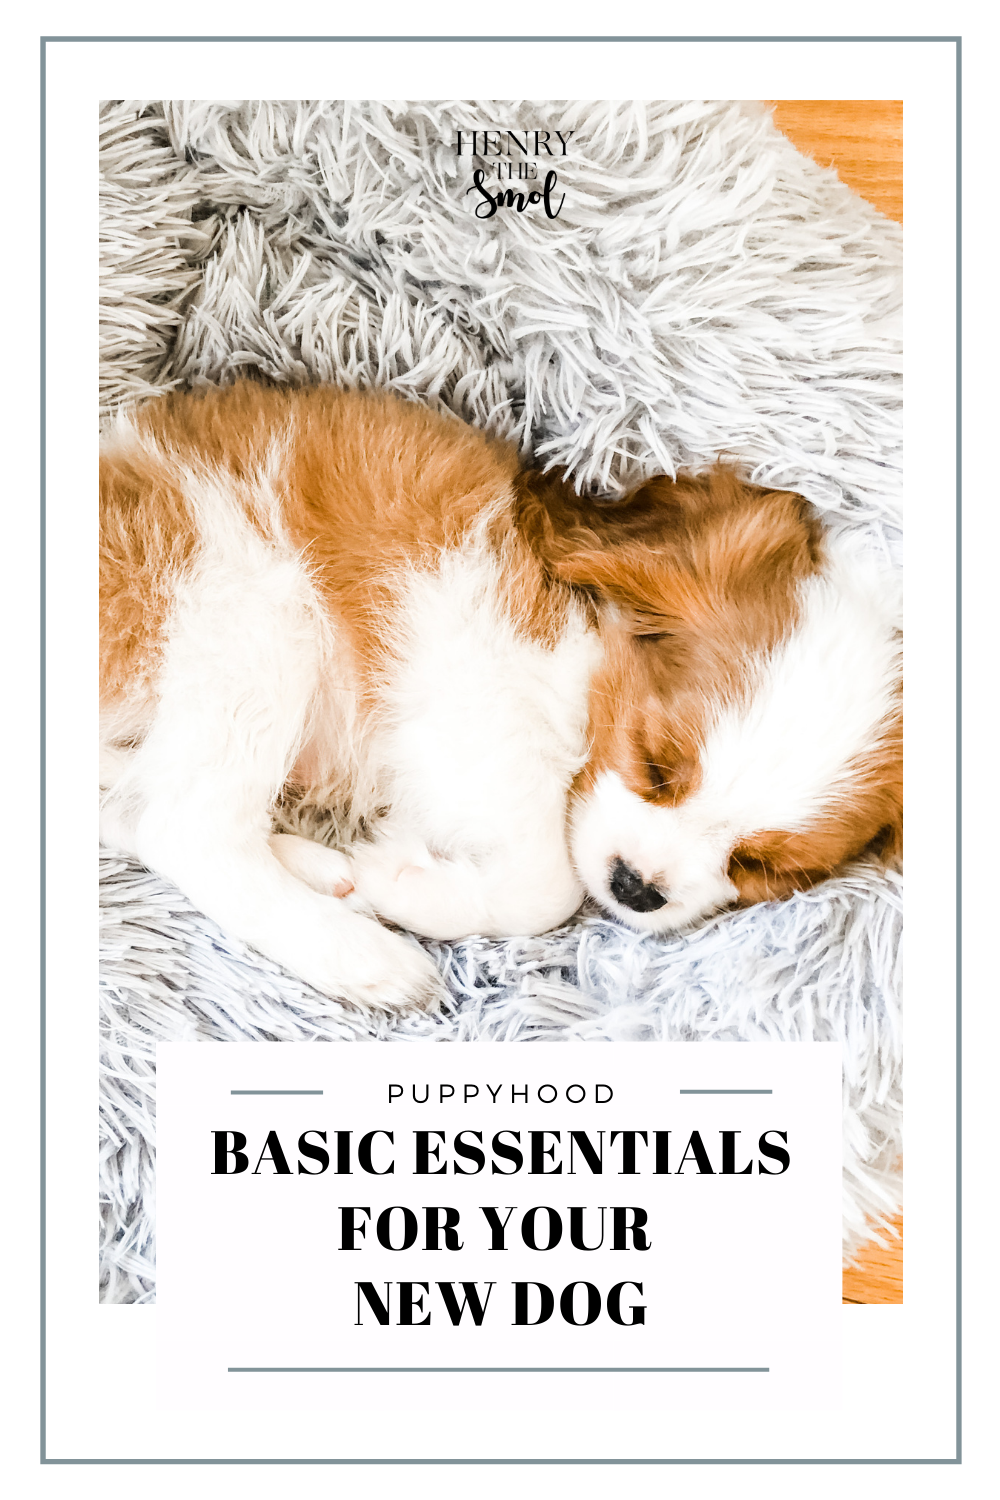 Preparing for Puppy: What You Need To Welcome A Dog